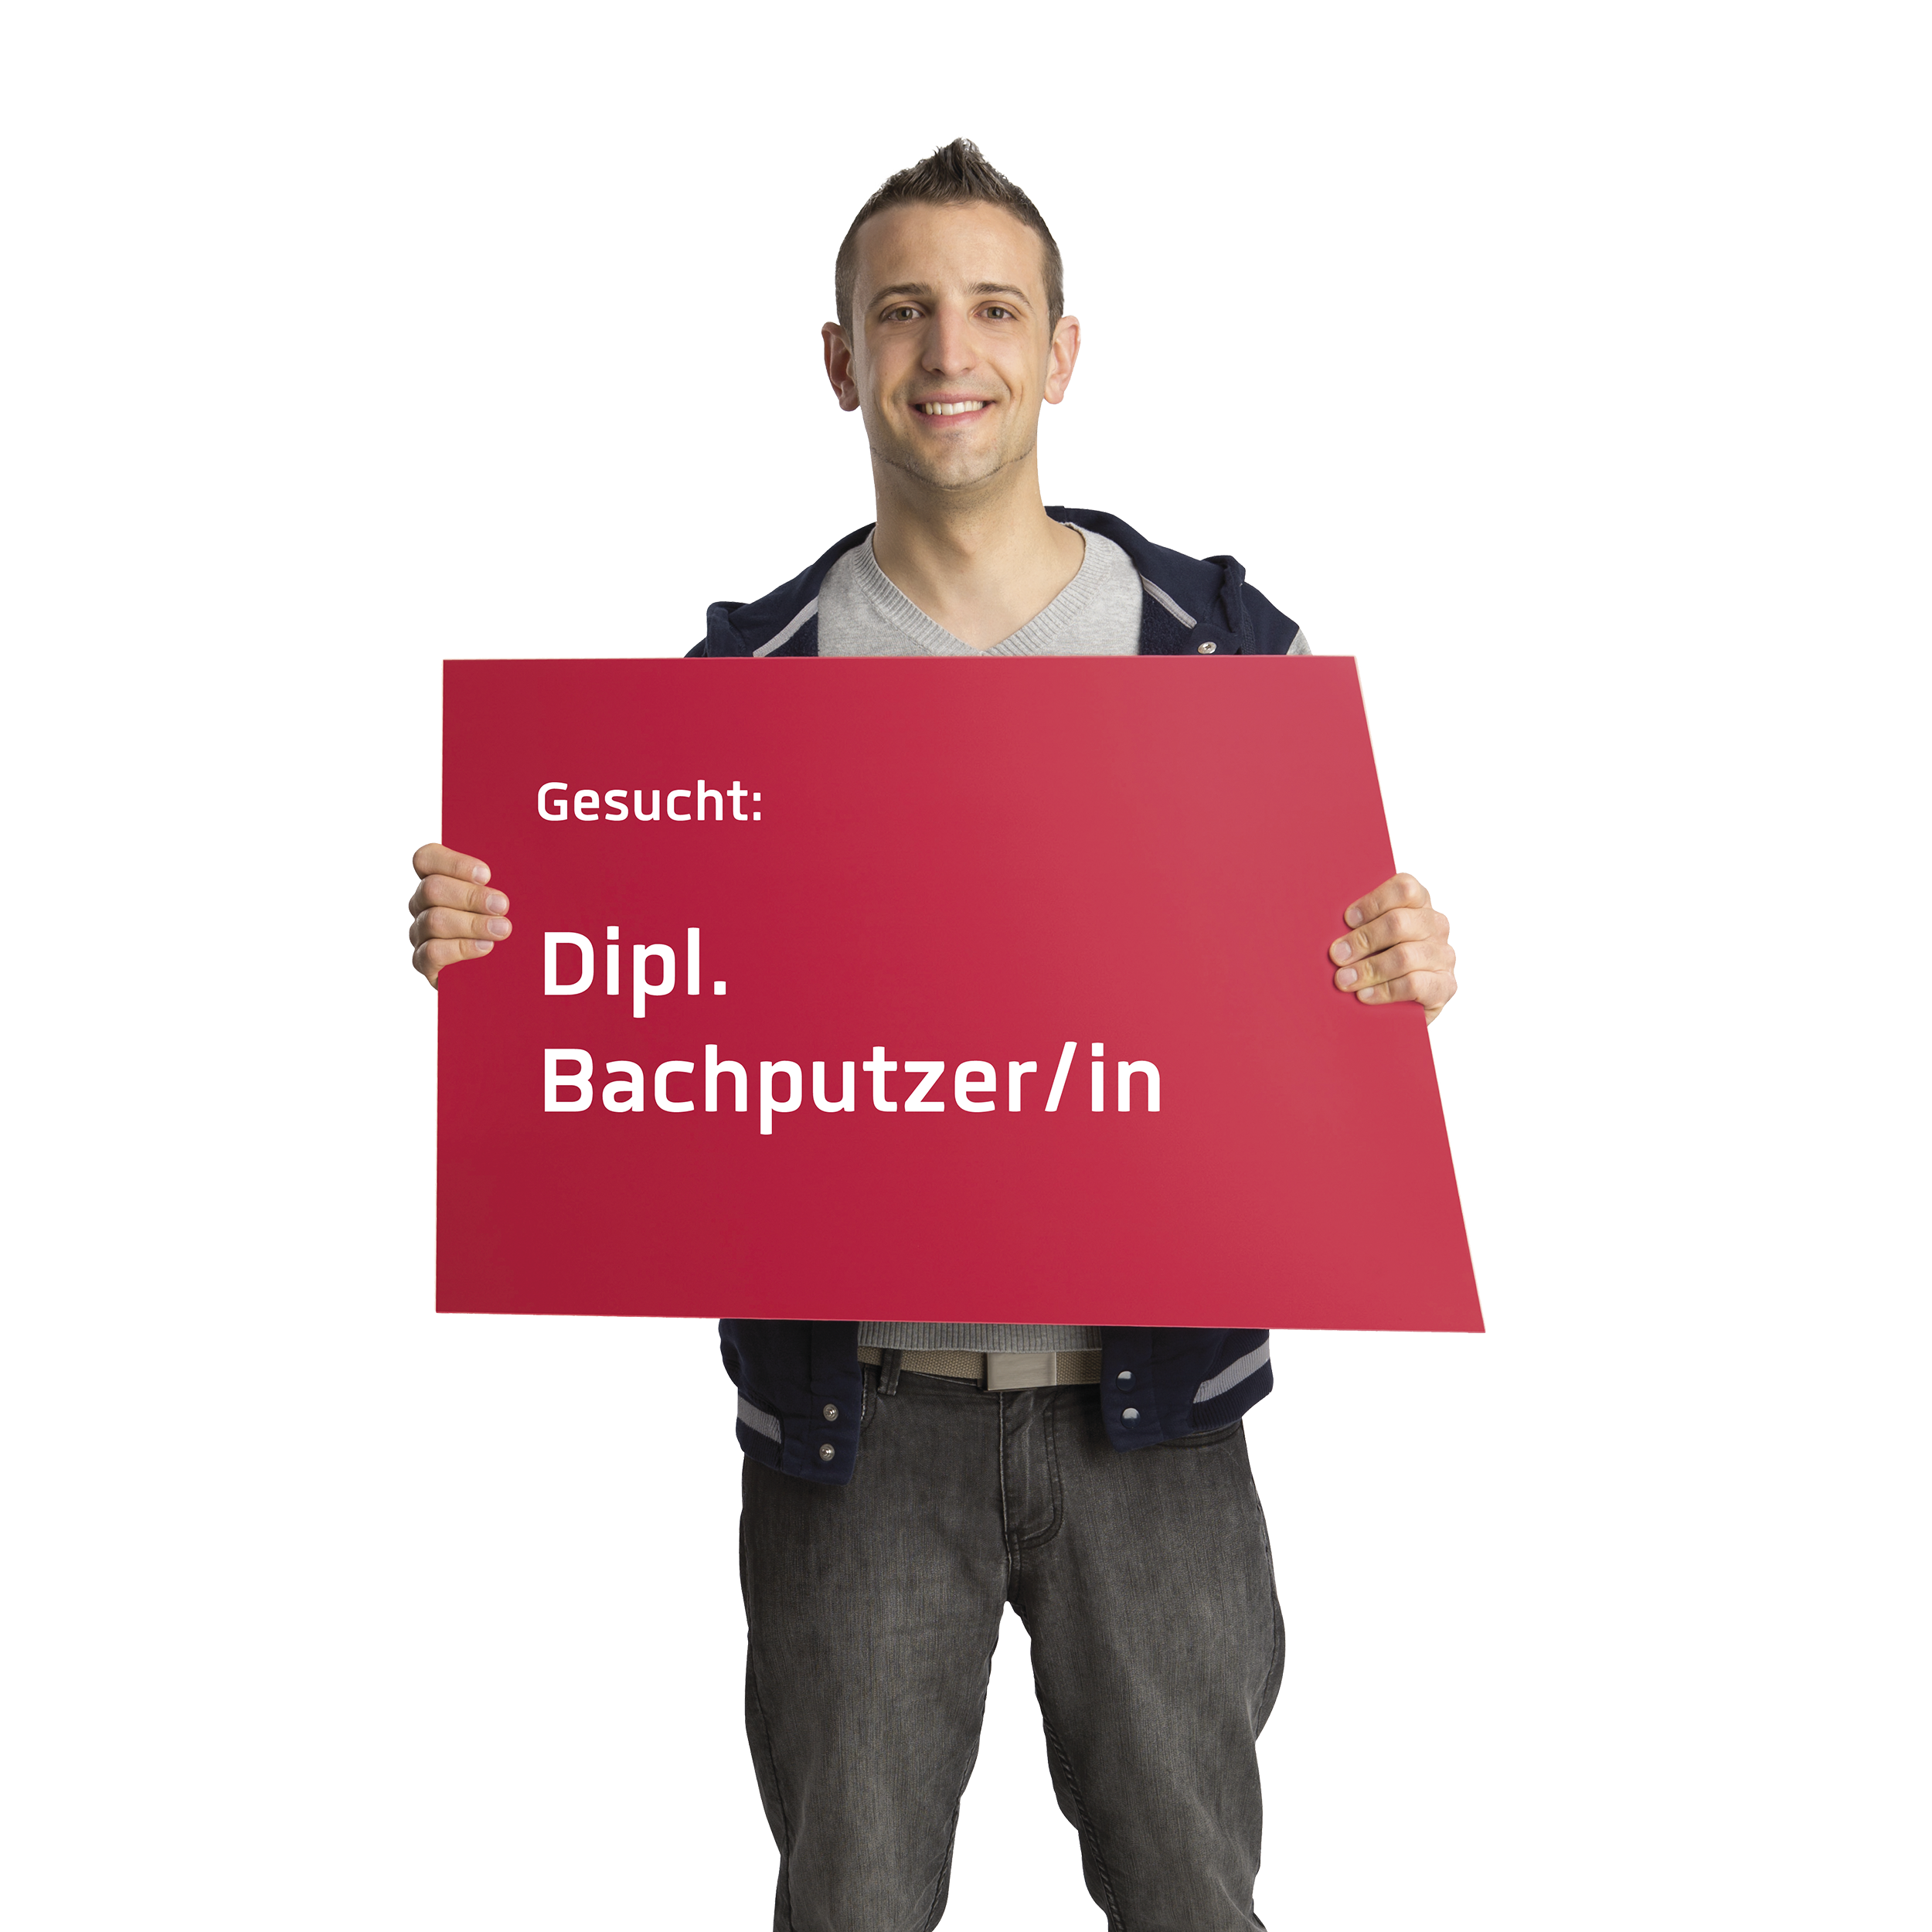 [Translate to Italienisch:] Dipl. Bachputzer/in